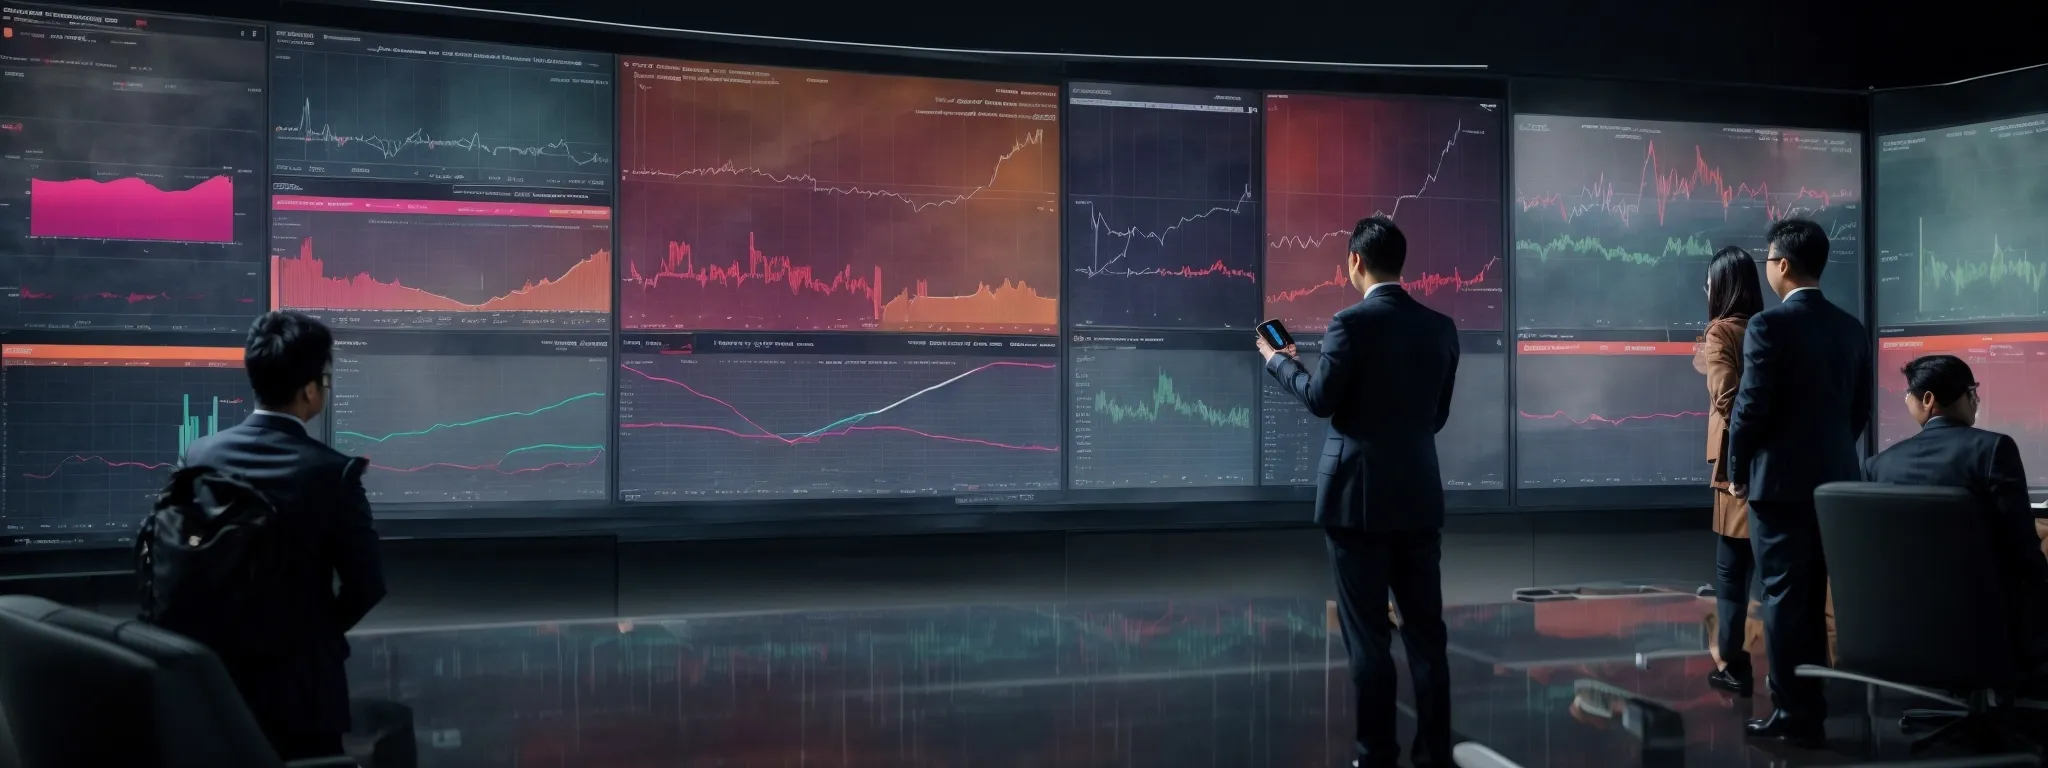 a strategic team reviews interactive analytics on a large touch screen, displaying colorful graphs and market trends.